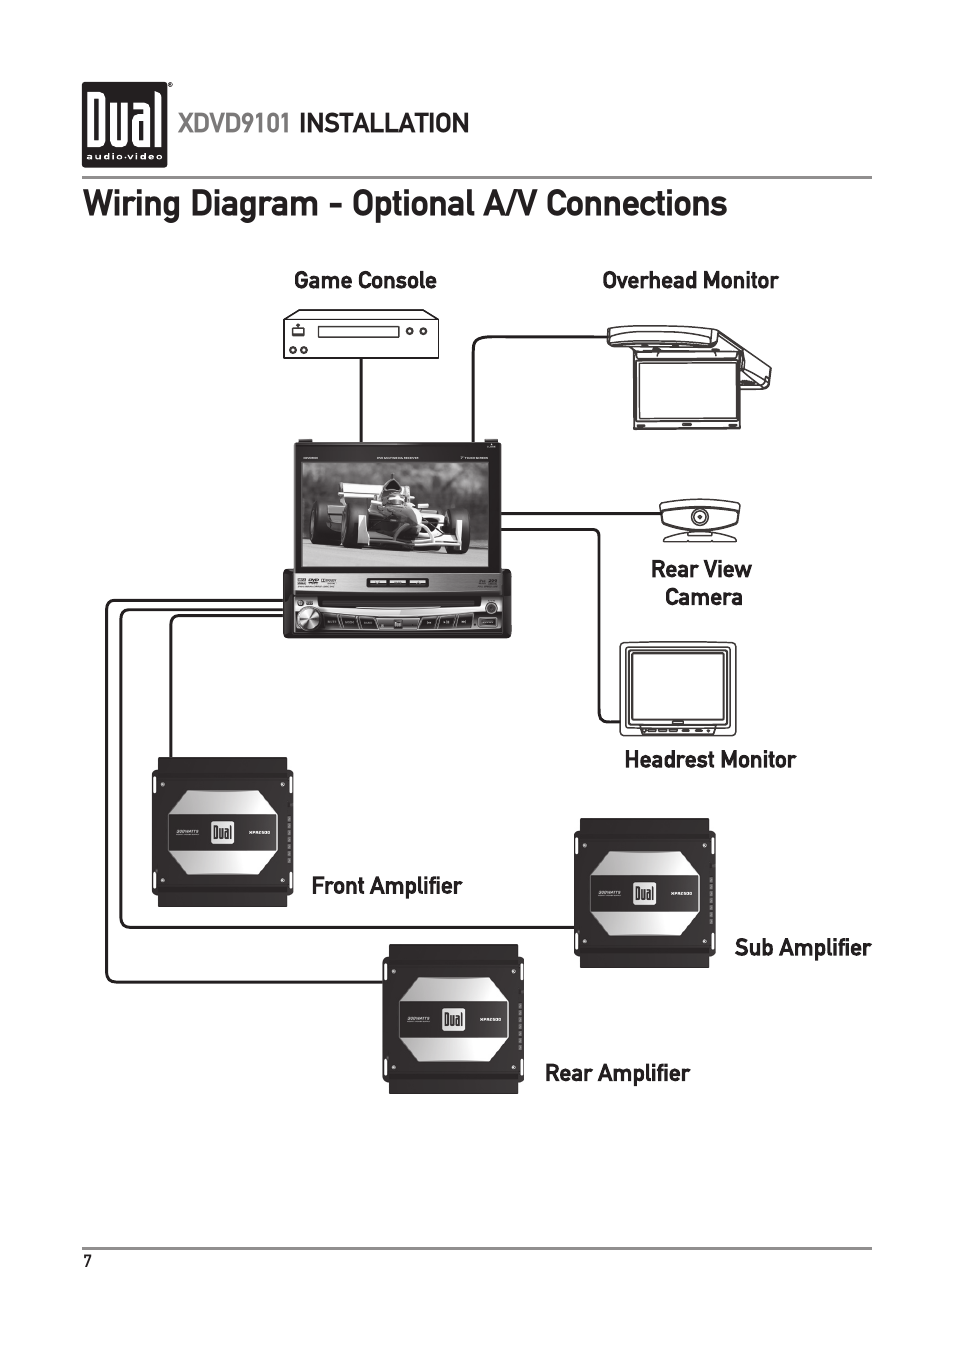 Wiring diagram - optional a/v connections | Dual XDVD9101 User Manual